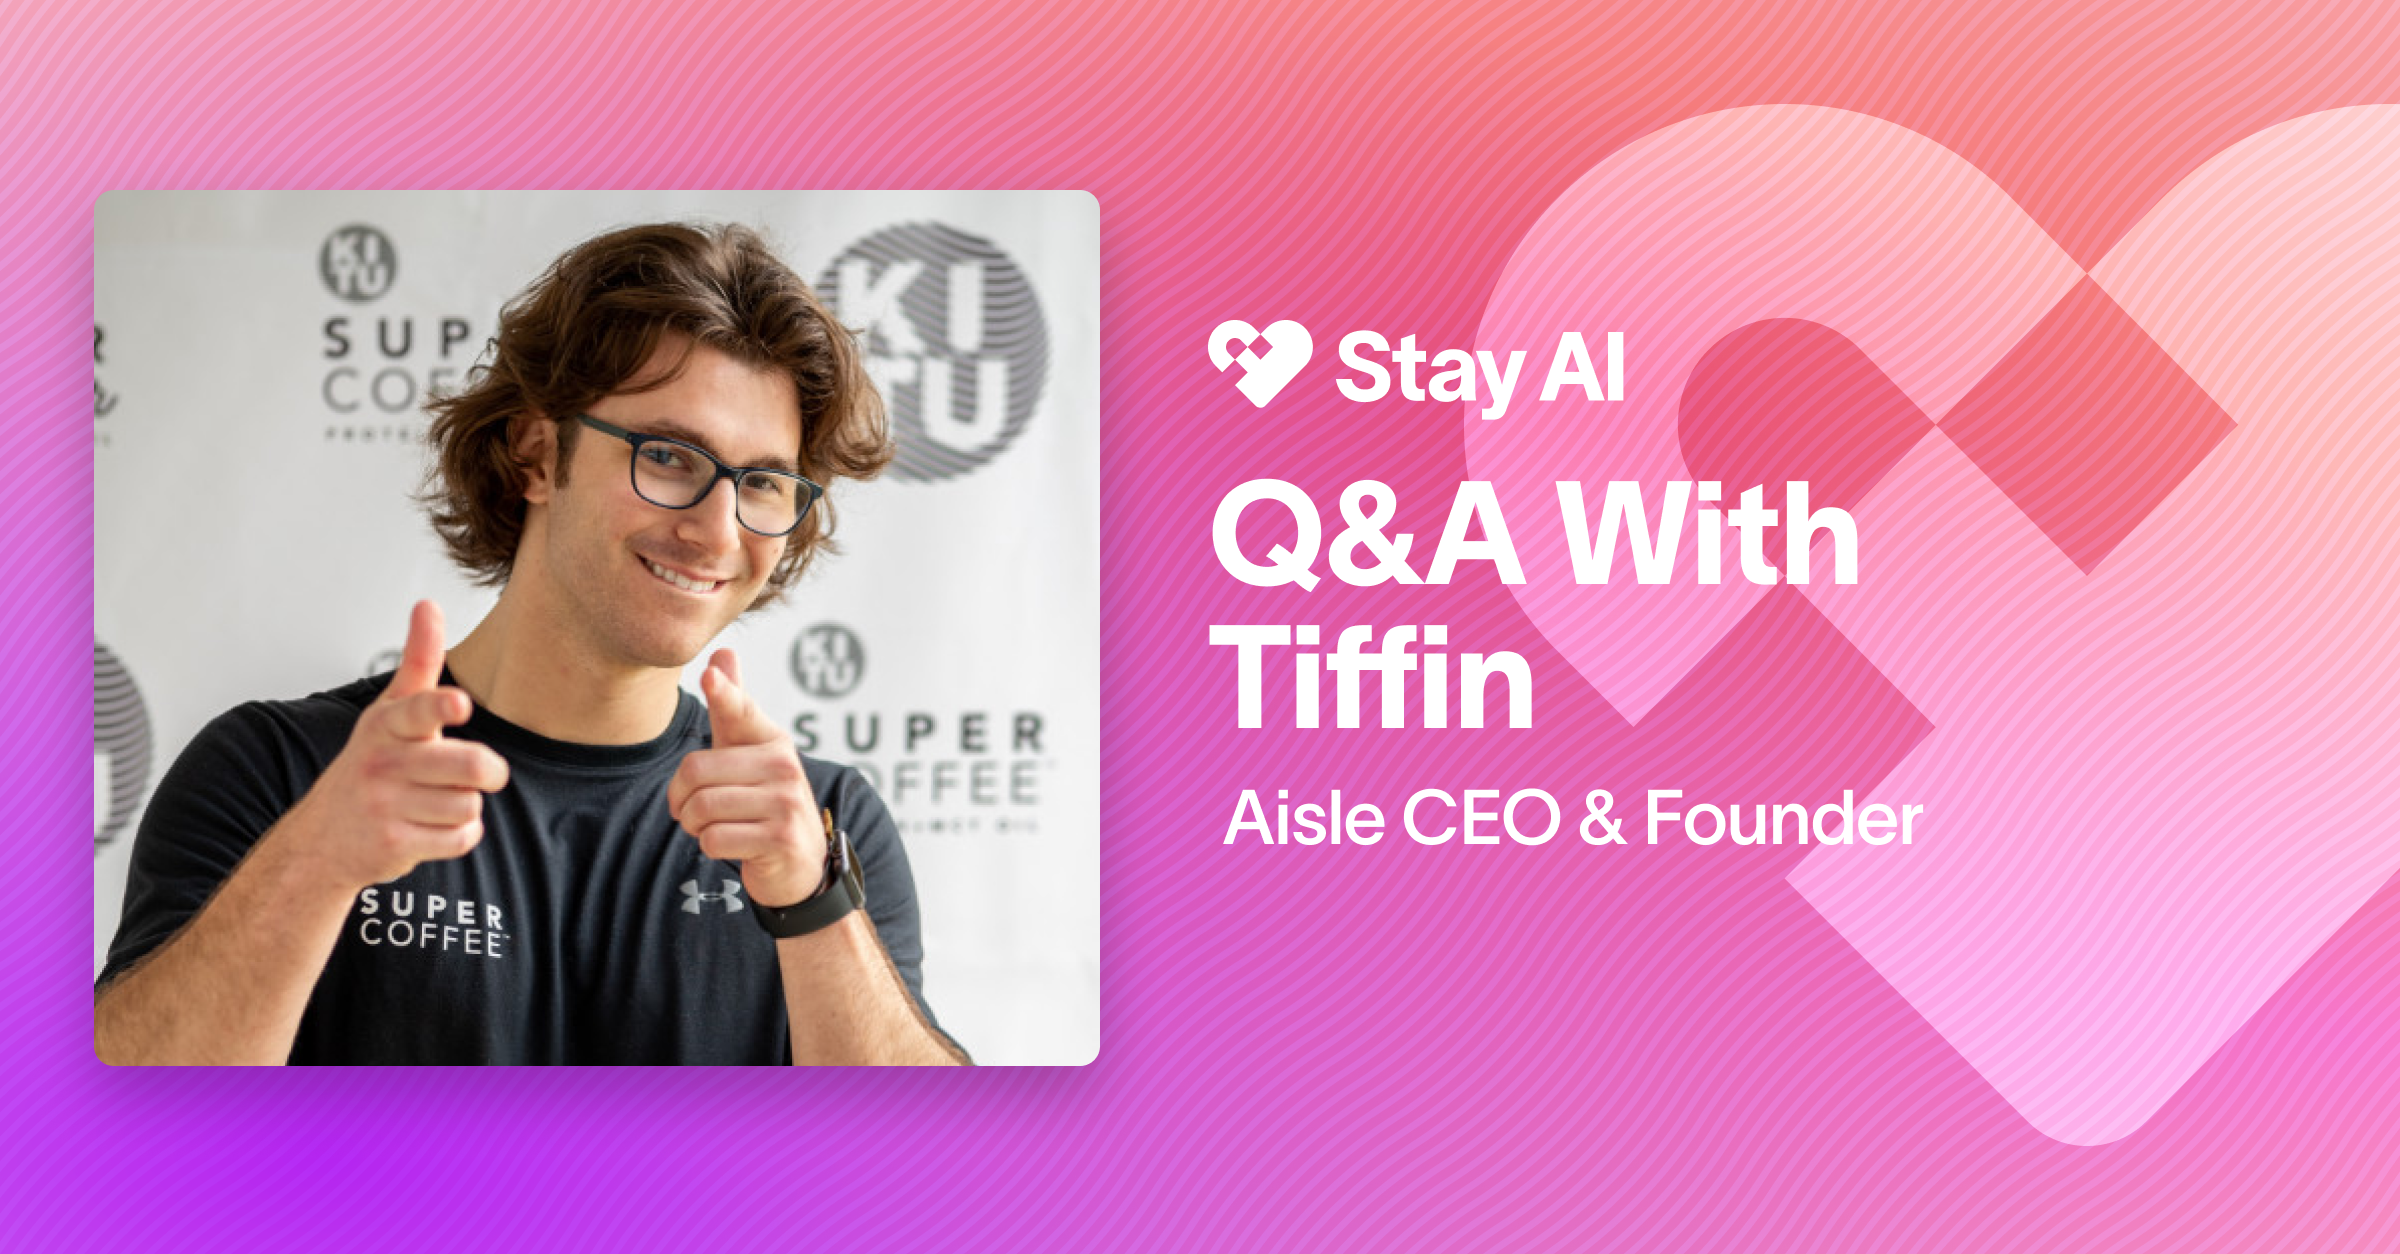 Q&A with Tiffin from Aisle